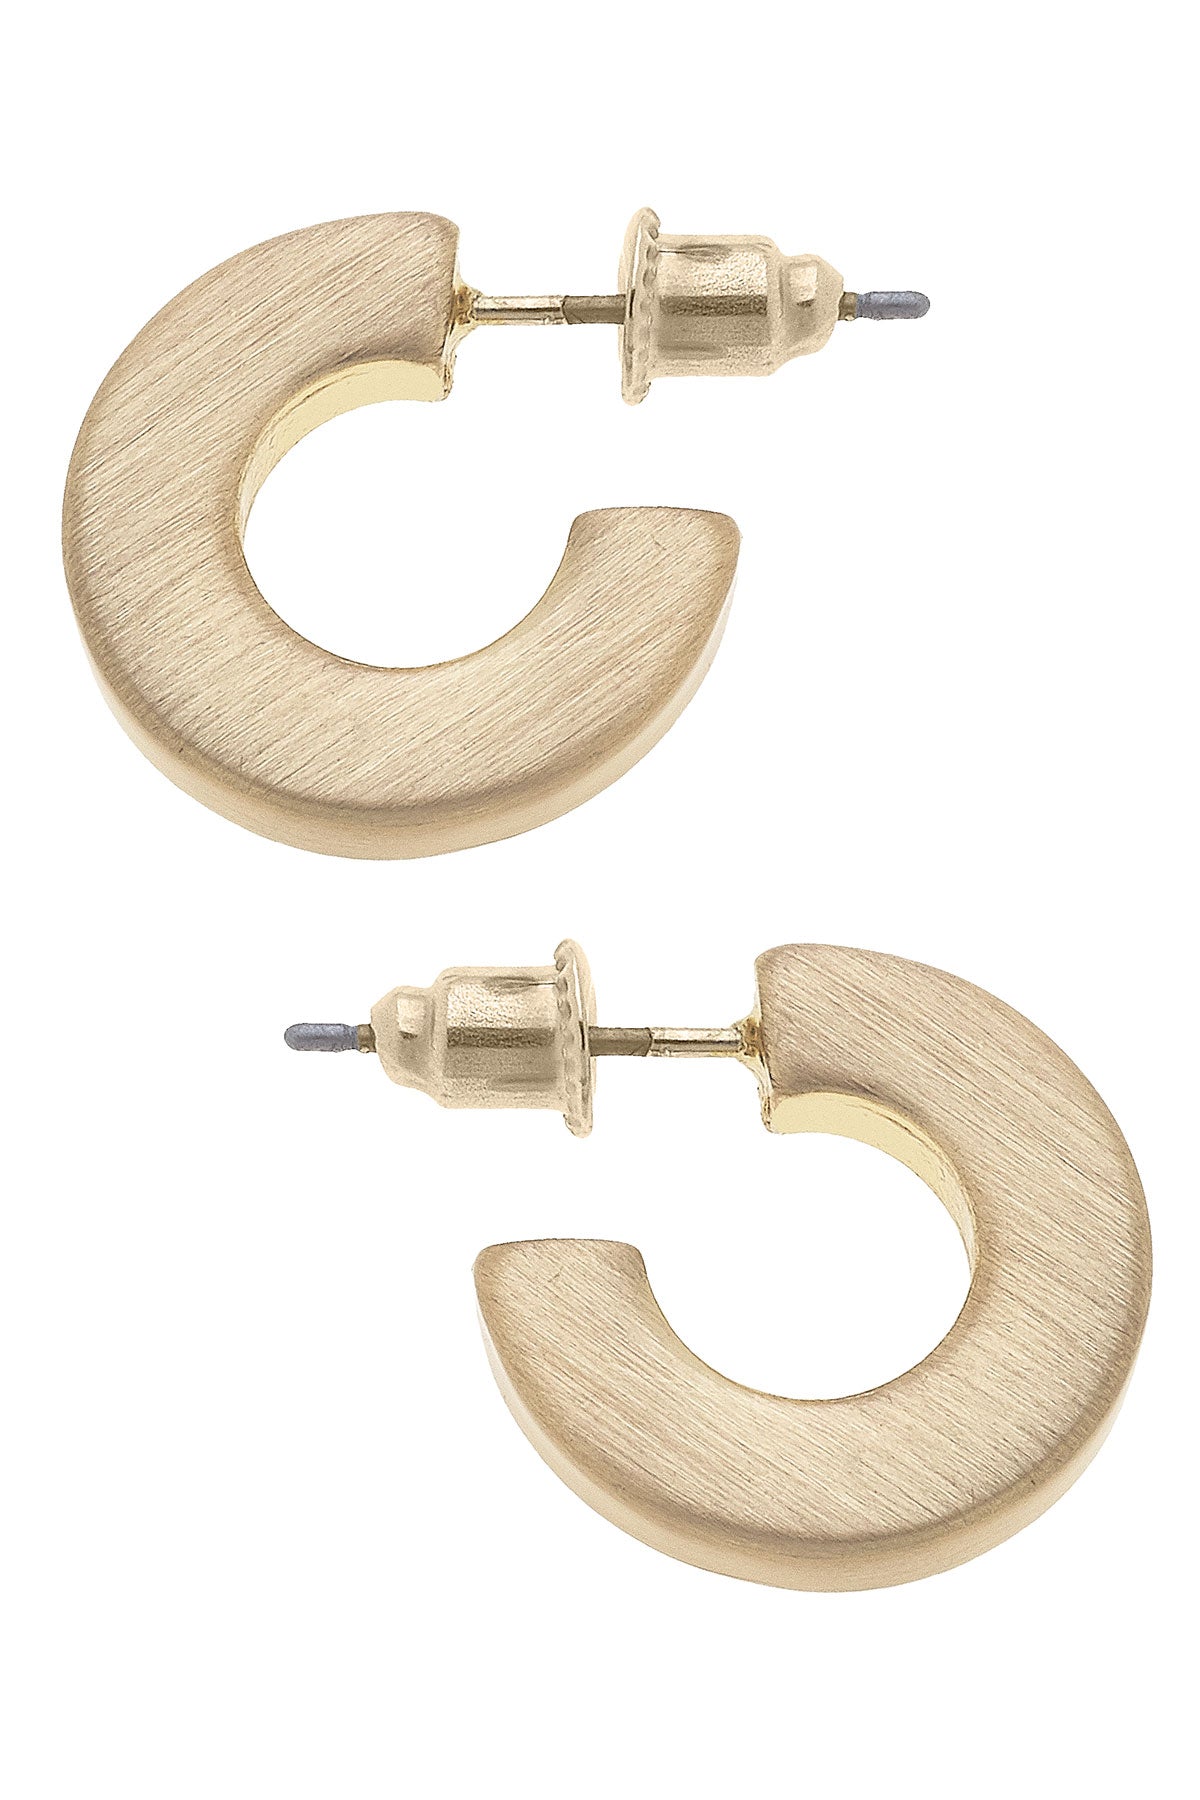 Emmy Small Flat Hoop Earrings in Satin Gold by CANVAS